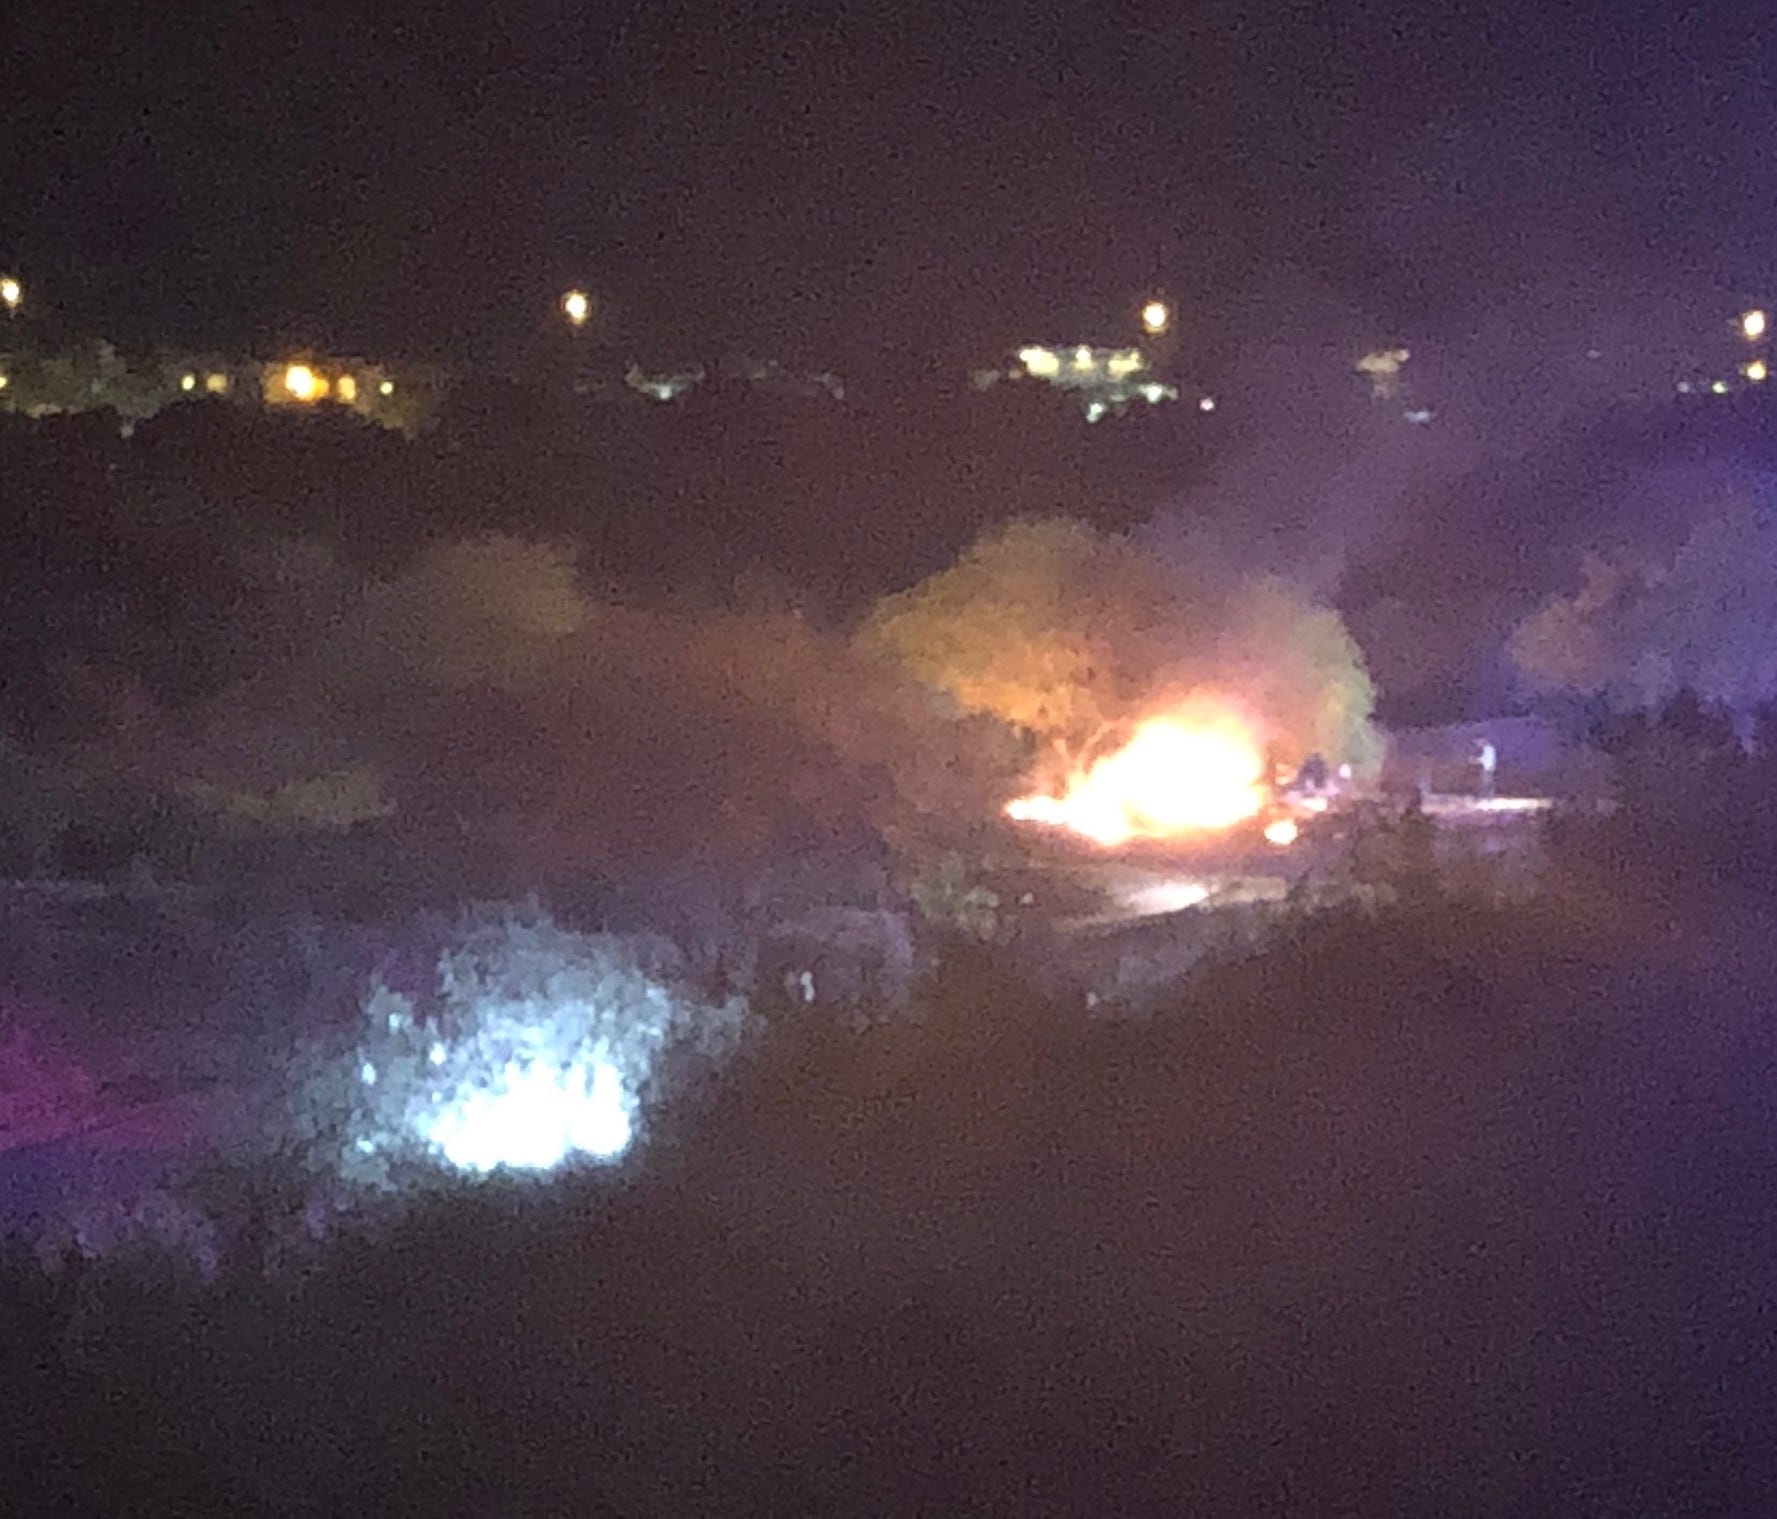 A small airplane crashed onto the TPC Scottsdale Champions Golf Course soon after takeoff from Scottsdale Airport on April 10, 2018.